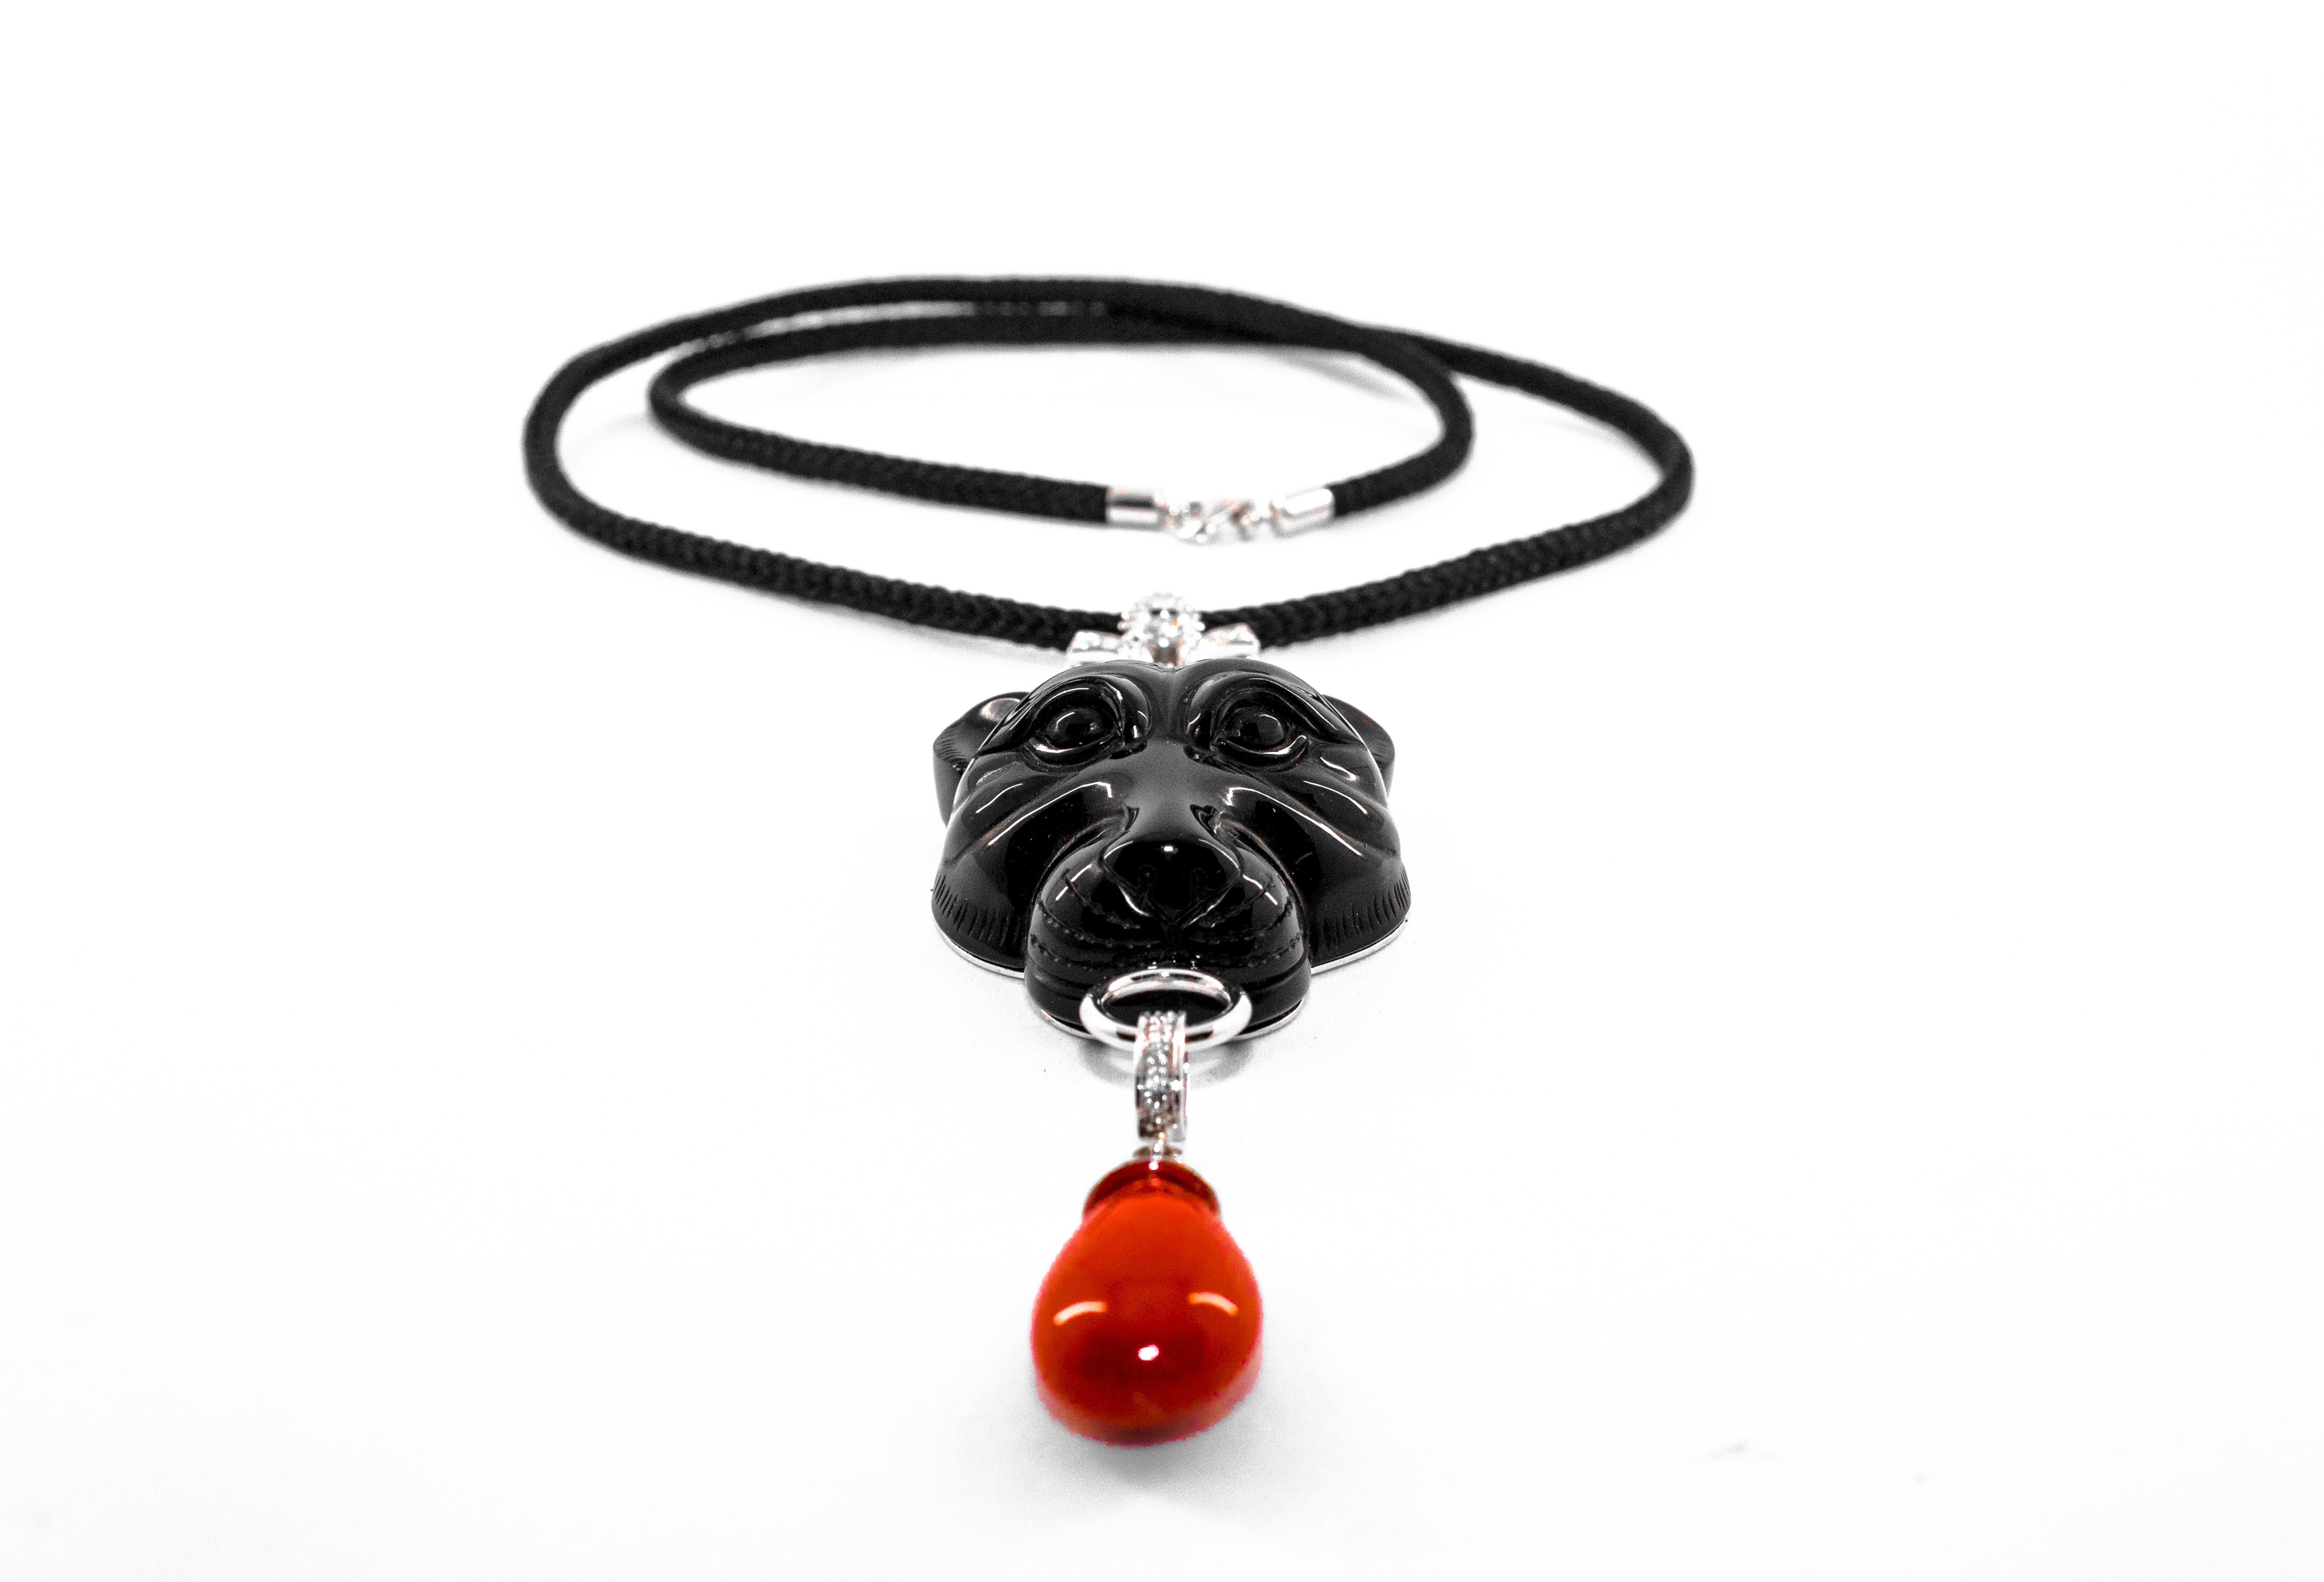 This Necklace is made of 18K White Gold and Onyx.
This Necklace has 0.35 Carats of White Diamonds.
This Necklace has Mediterranean (Sardinia, Italy) Red Coral.
The Necklace length is 50cm.
We're a workshop so every piece is handmade, customizable